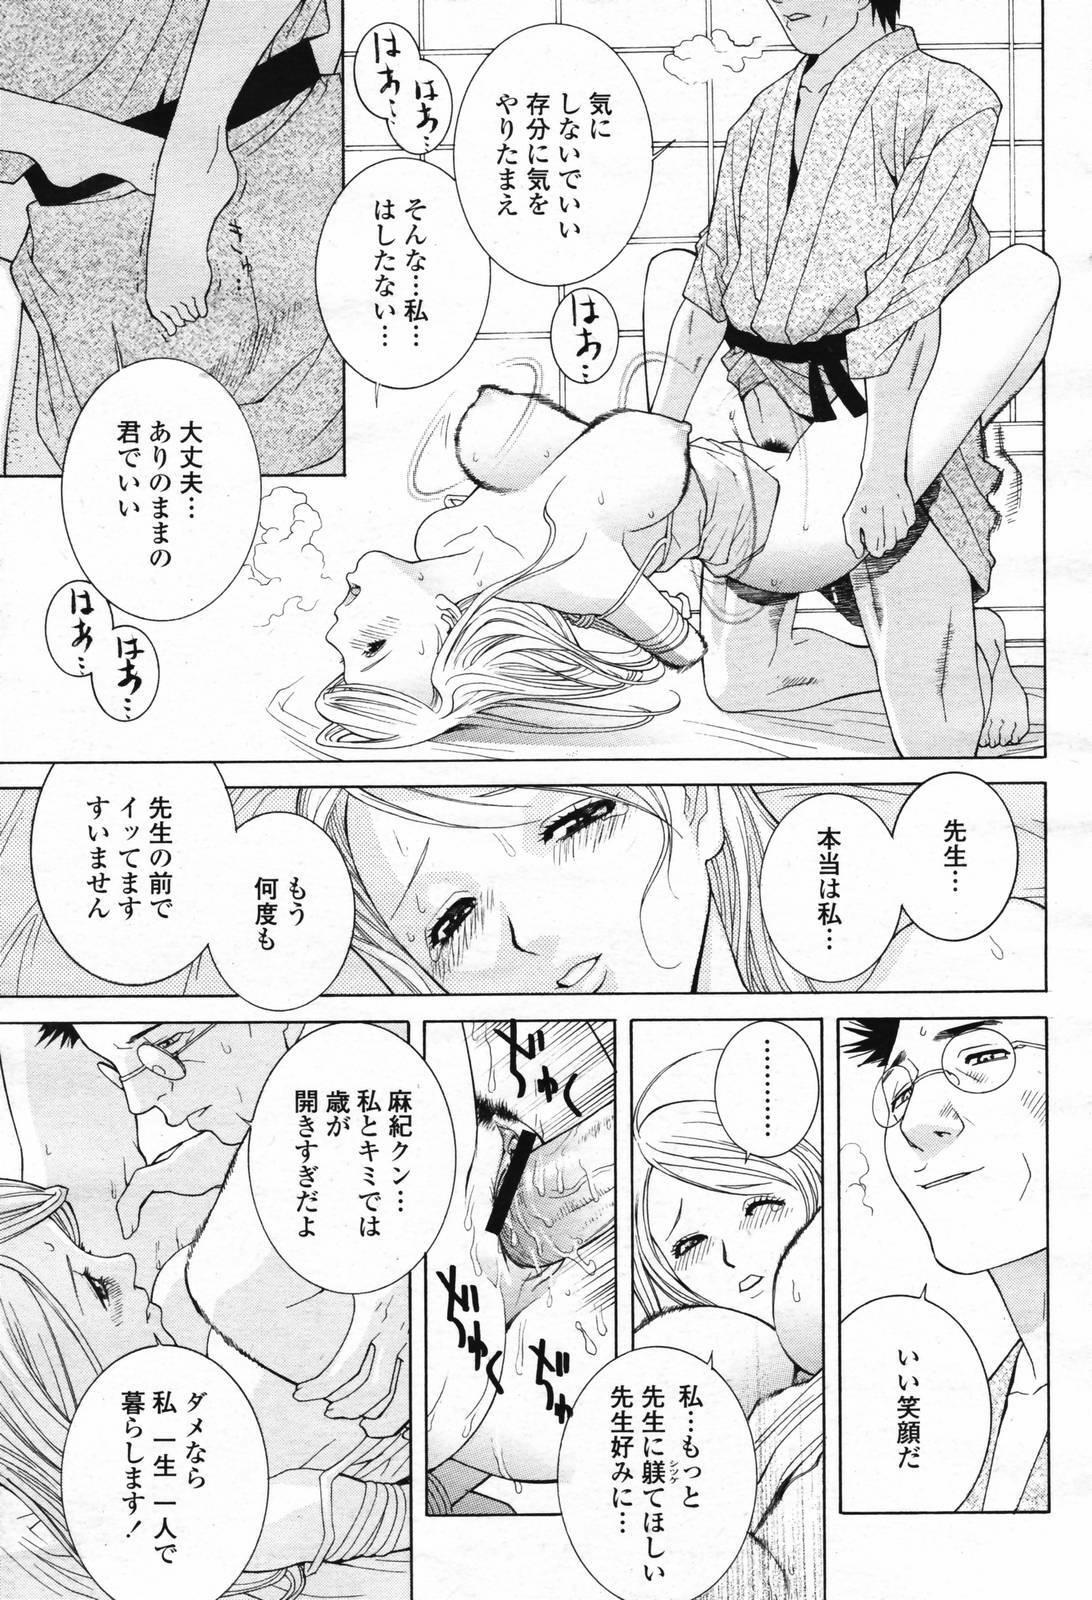 COMIC Momohime 2007-02 page 43 full